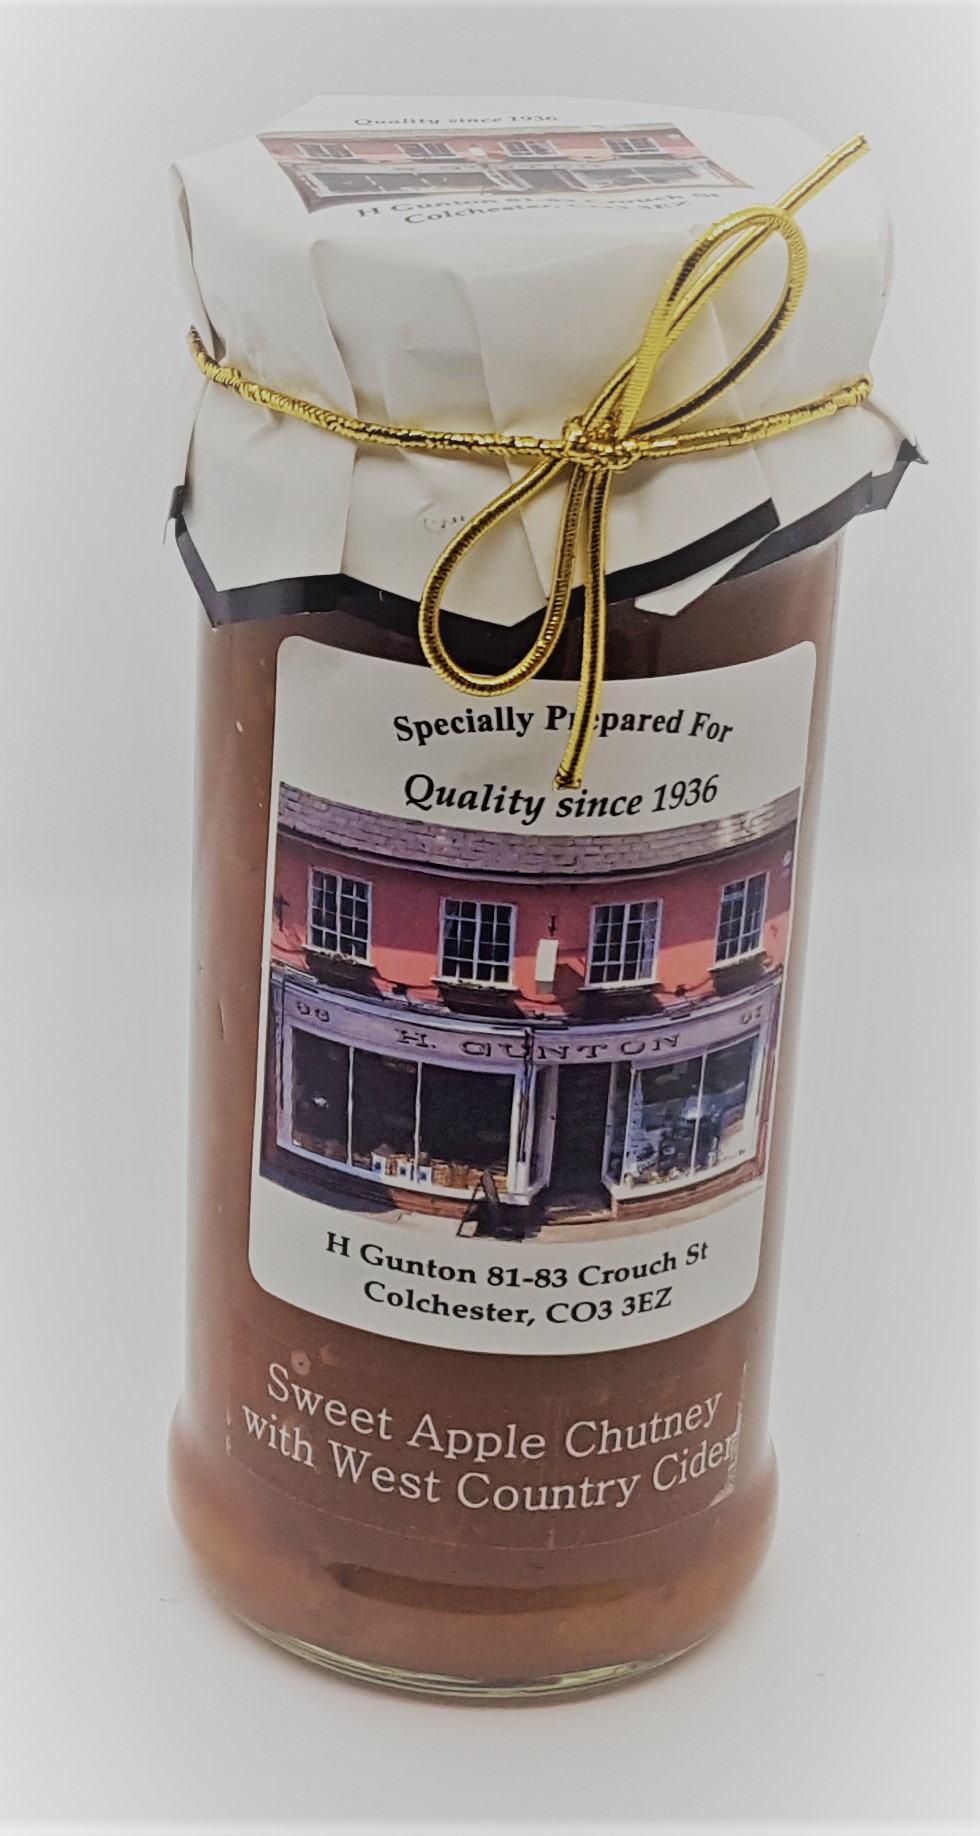 Guntons Sweet Apple Chutney with West Country Cider 